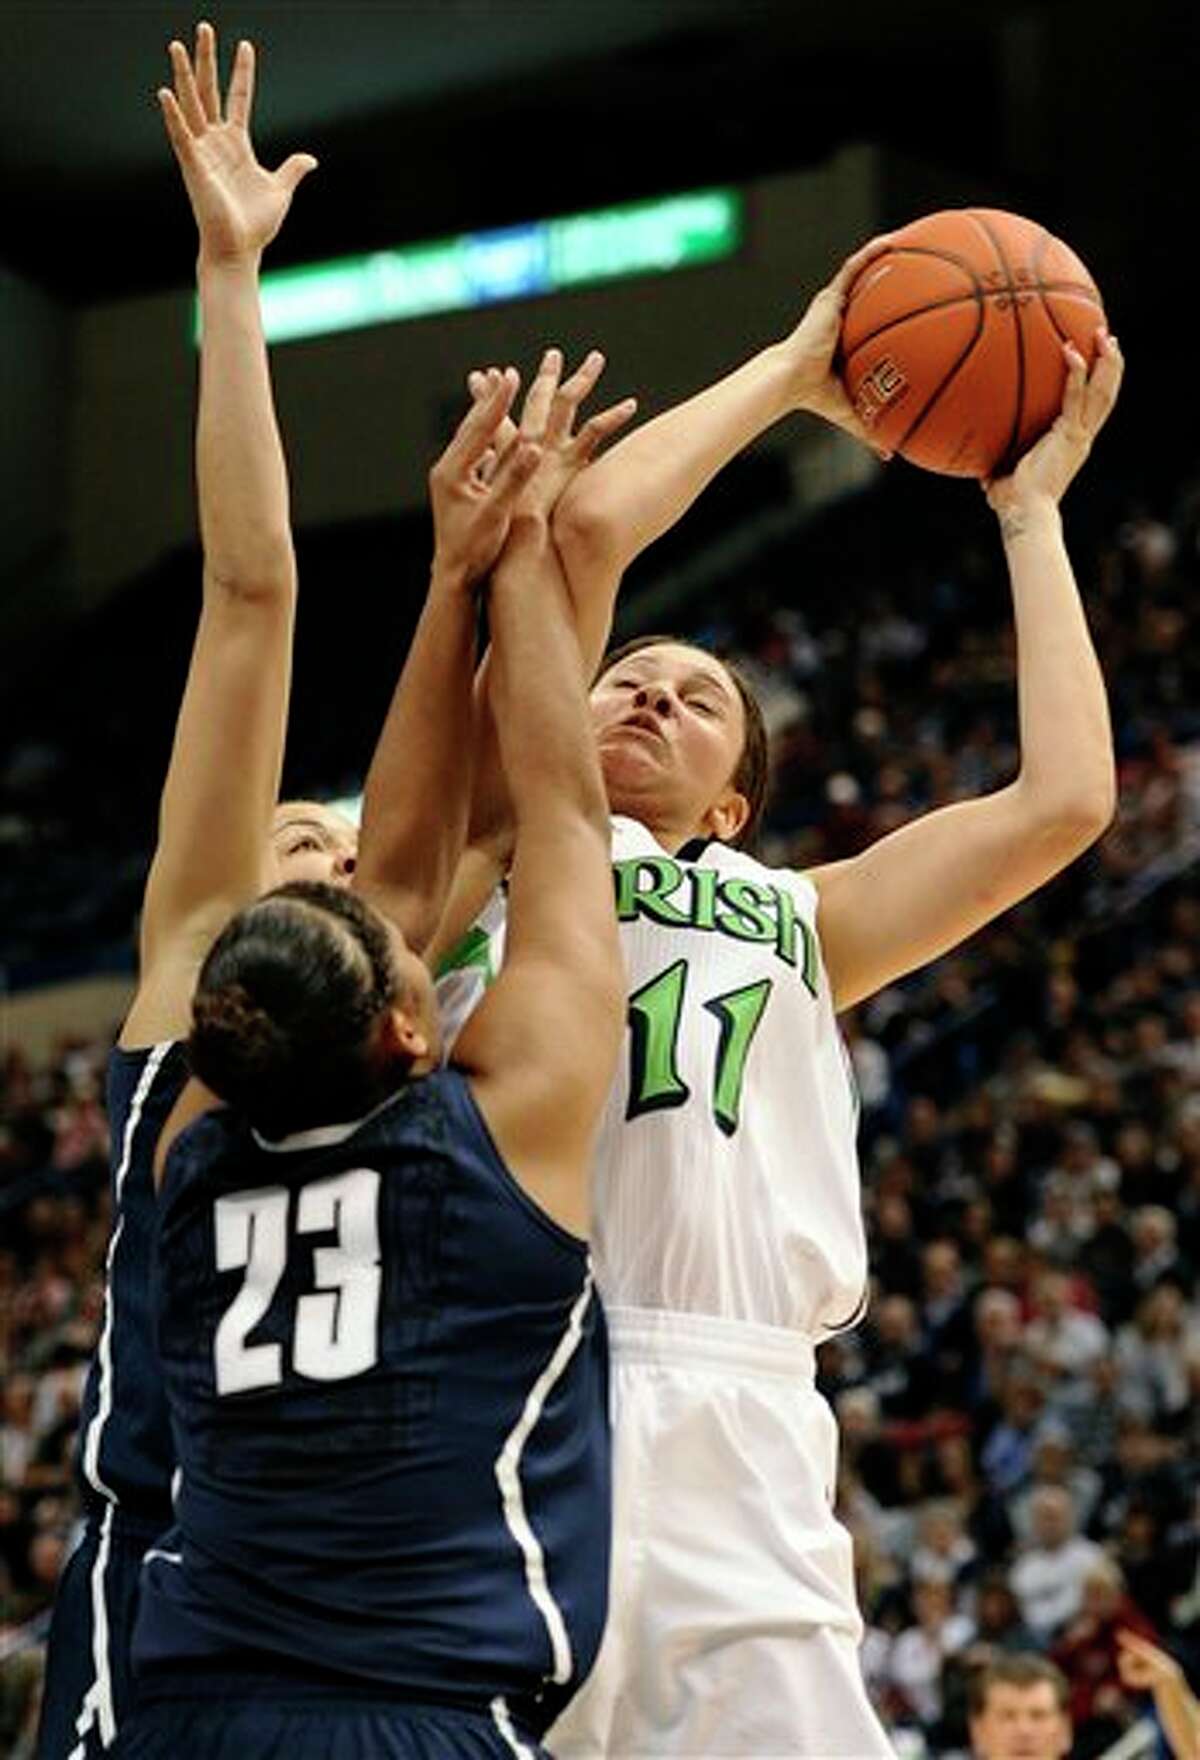 Notre Dame's Natalie Achonwa (11) goes up to the basket while guarded by Connecticut's Kaleena Mosqueda-Lewis (23) and Connecticut's Kiah Stokes, back, first half of an NCAA college basketball game in the final of the Big East Conference women's tournament in Hartford, Conn., Tuesday, March 12, 2013. (AP Photo/Jessica Hill)